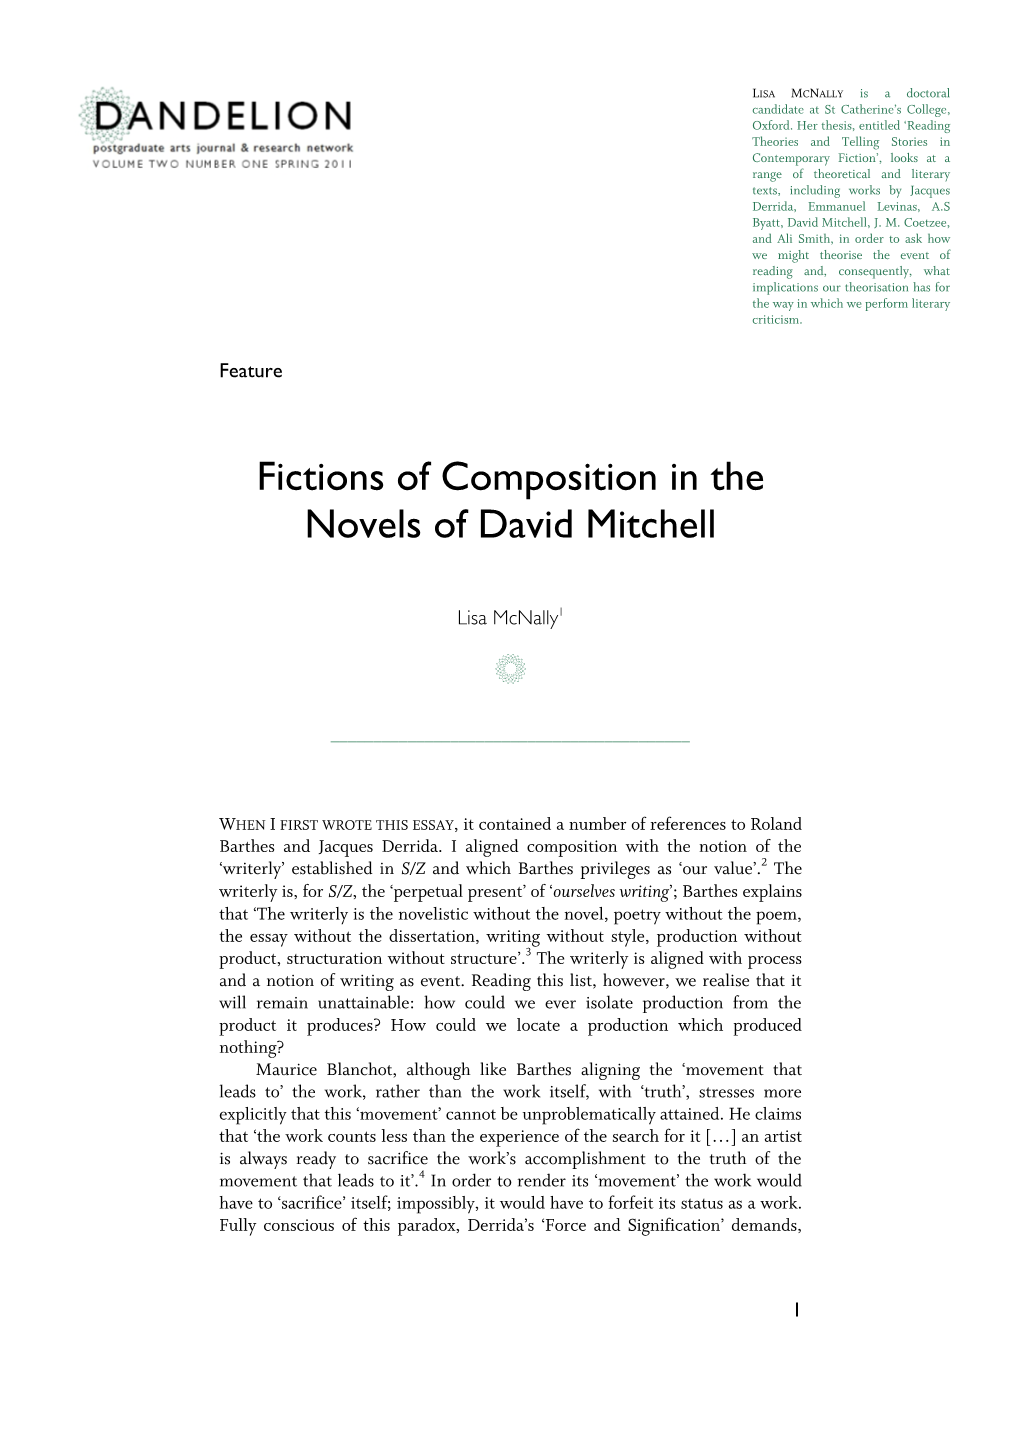 Fictions of Composition in the Novels of David Mitchell